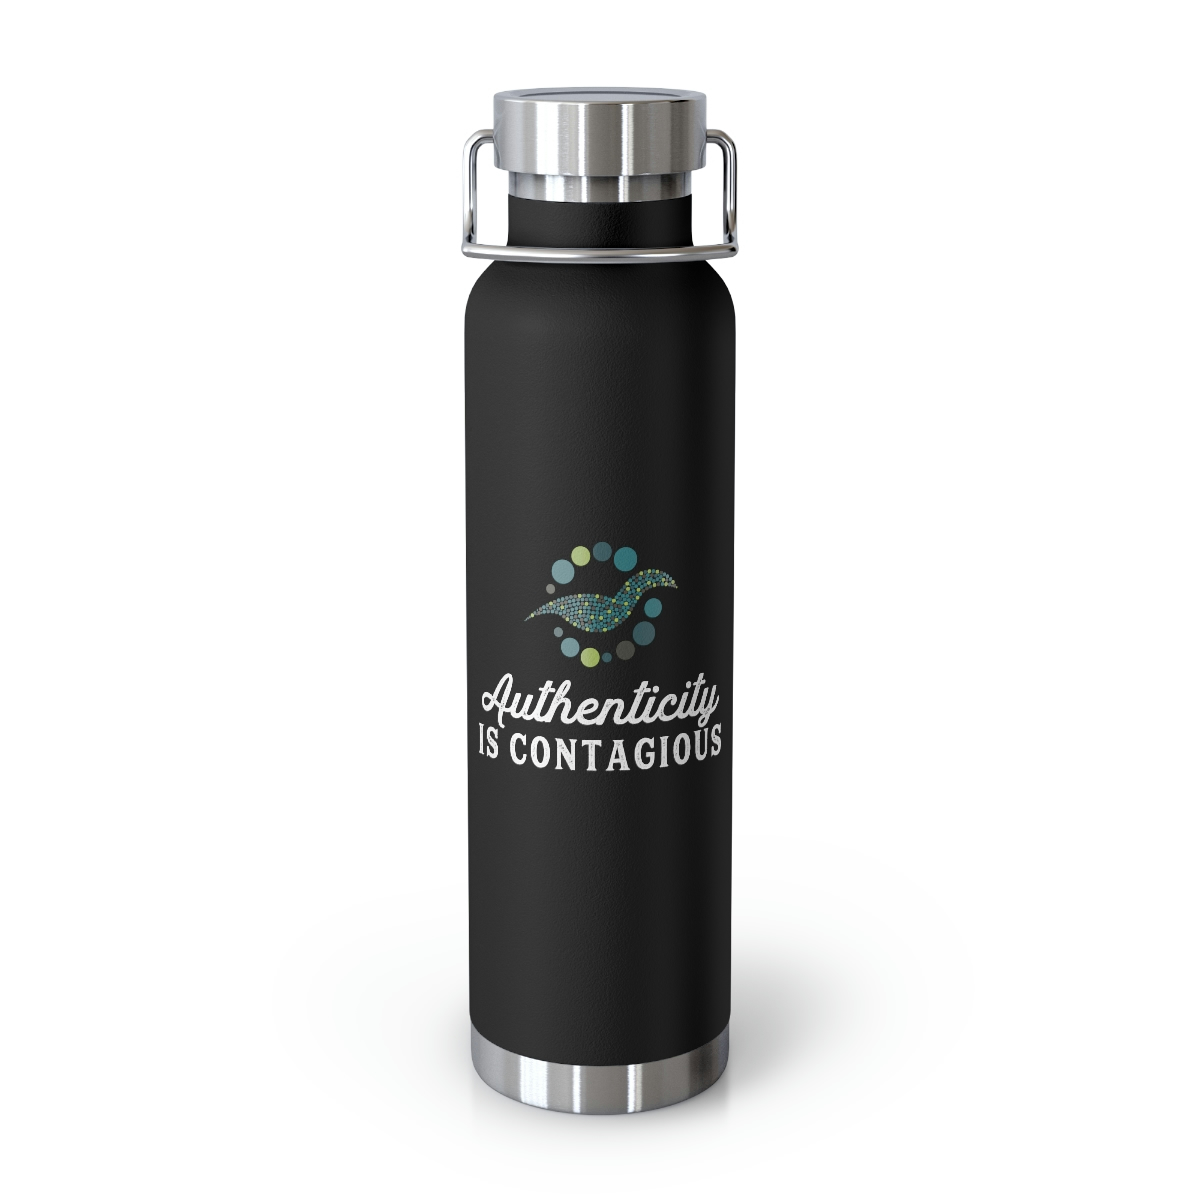 Authenticity is Contagious Copper Vacuum Insulated Bottle, 22oz